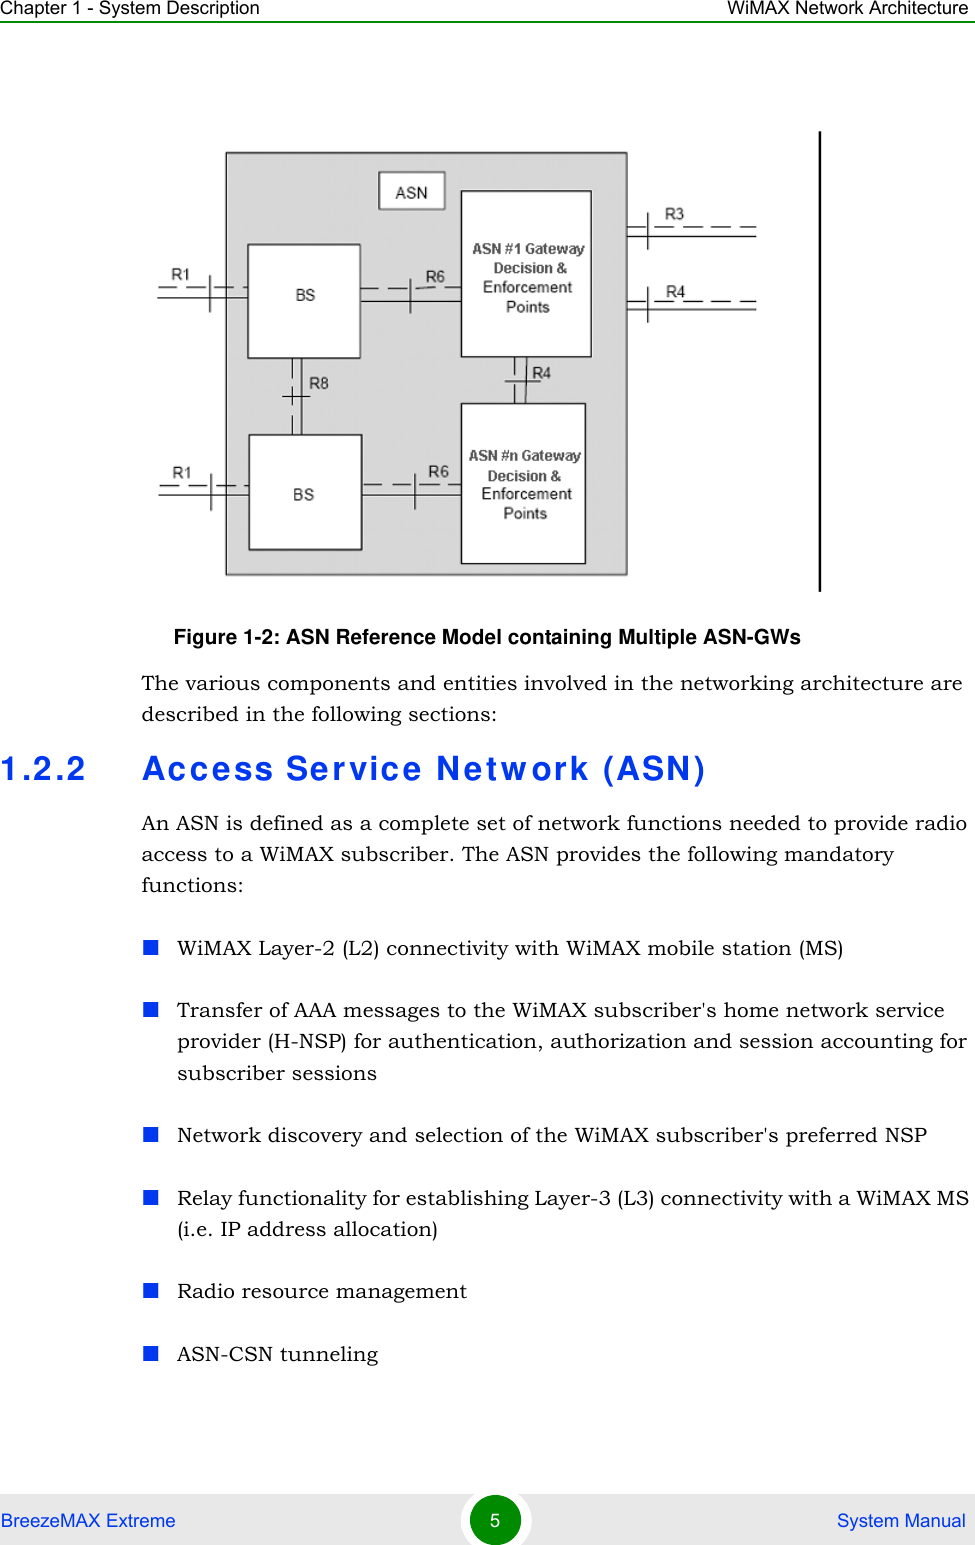 Chapter 1 - System Description WiMAX Network ArchitectureBreezeMAX Extreme 5 System Manual The various components and entities involved in the networking architecture are described in the following sections:1.2.2 Access Se rvice Netw ork (ASN)An ASN is defined as a complete set of network functions needed to provide radio access to a WiMAX subscriber. The ASN provides the following mandatory functions:WiMAX Layer-2 (L2) connectivity with WiMAX mobile station (MS) Transfer of AAA messages to the WiMAX subscriber&apos;s home network service provider (H-NSP) for authentication, authorization and session accounting for subscriber sessionsNetwork discovery and selection of the WiMAX subscriber&apos;s preferred NSPRelay functionality for establishing Layer-3 (L3) connectivity with a WiMAX MS (i.e. IP address allocation)Radio resource managementASN-CSN tunnelingFigure 1-2: ASN Reference Model containing Multiple ASN-GWs